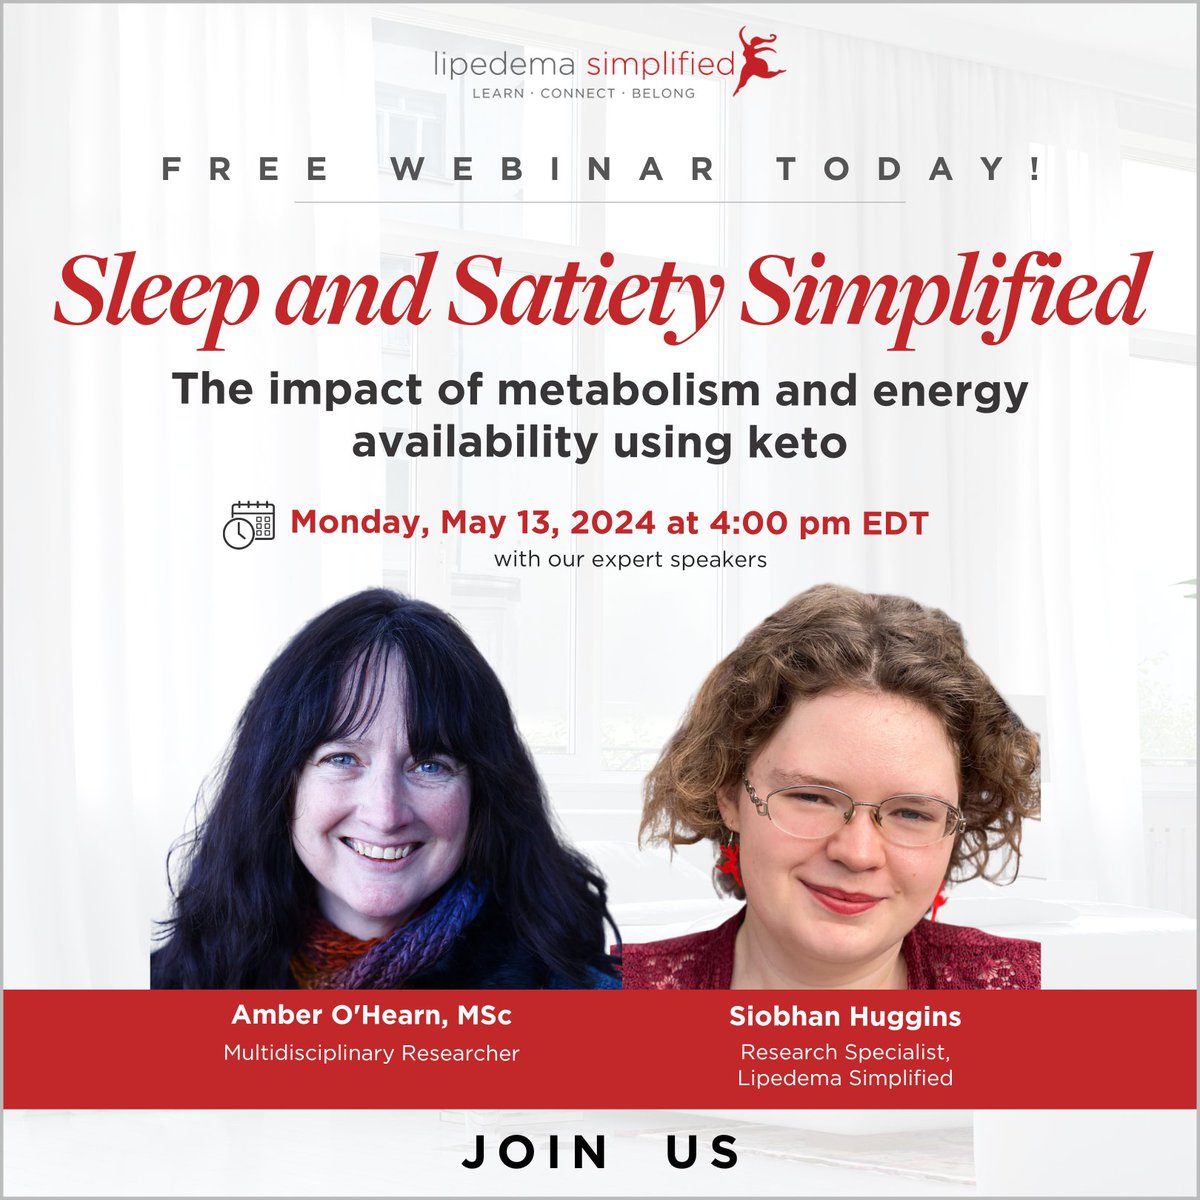 Come join us in a little under half an hour for.... @KetoCarnivore's 'Satiety and Sleep Simplified' webinar!
If you're not already aware of the link between sleep and satiety (and how ketogenic diets can impact this connection) you are in for a treat.
Please note that if you sign